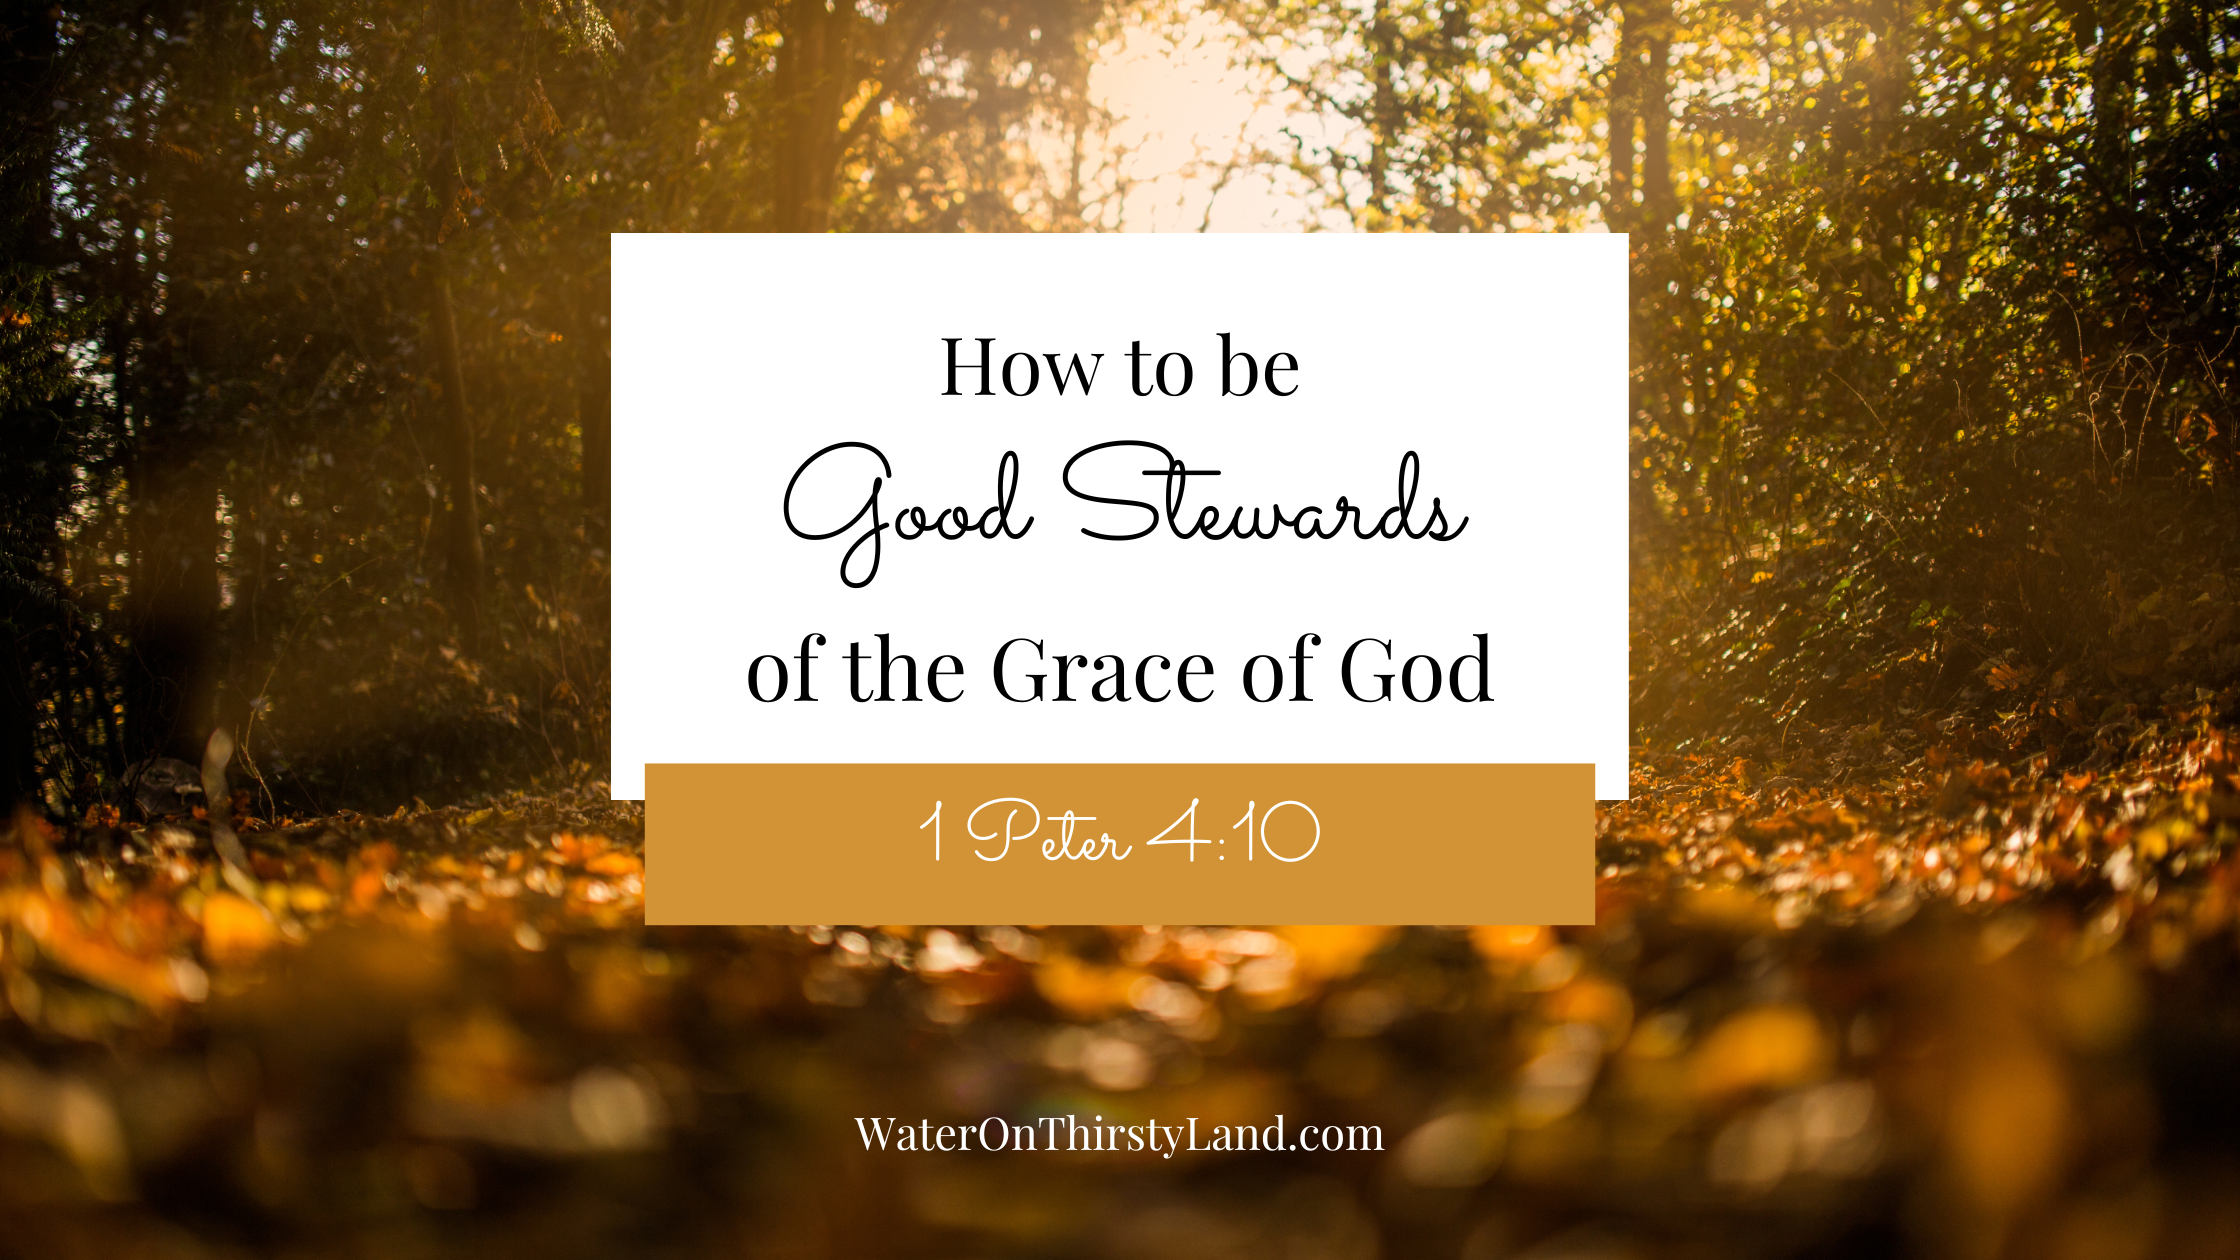 How to be Good Stewards of the Grace of God